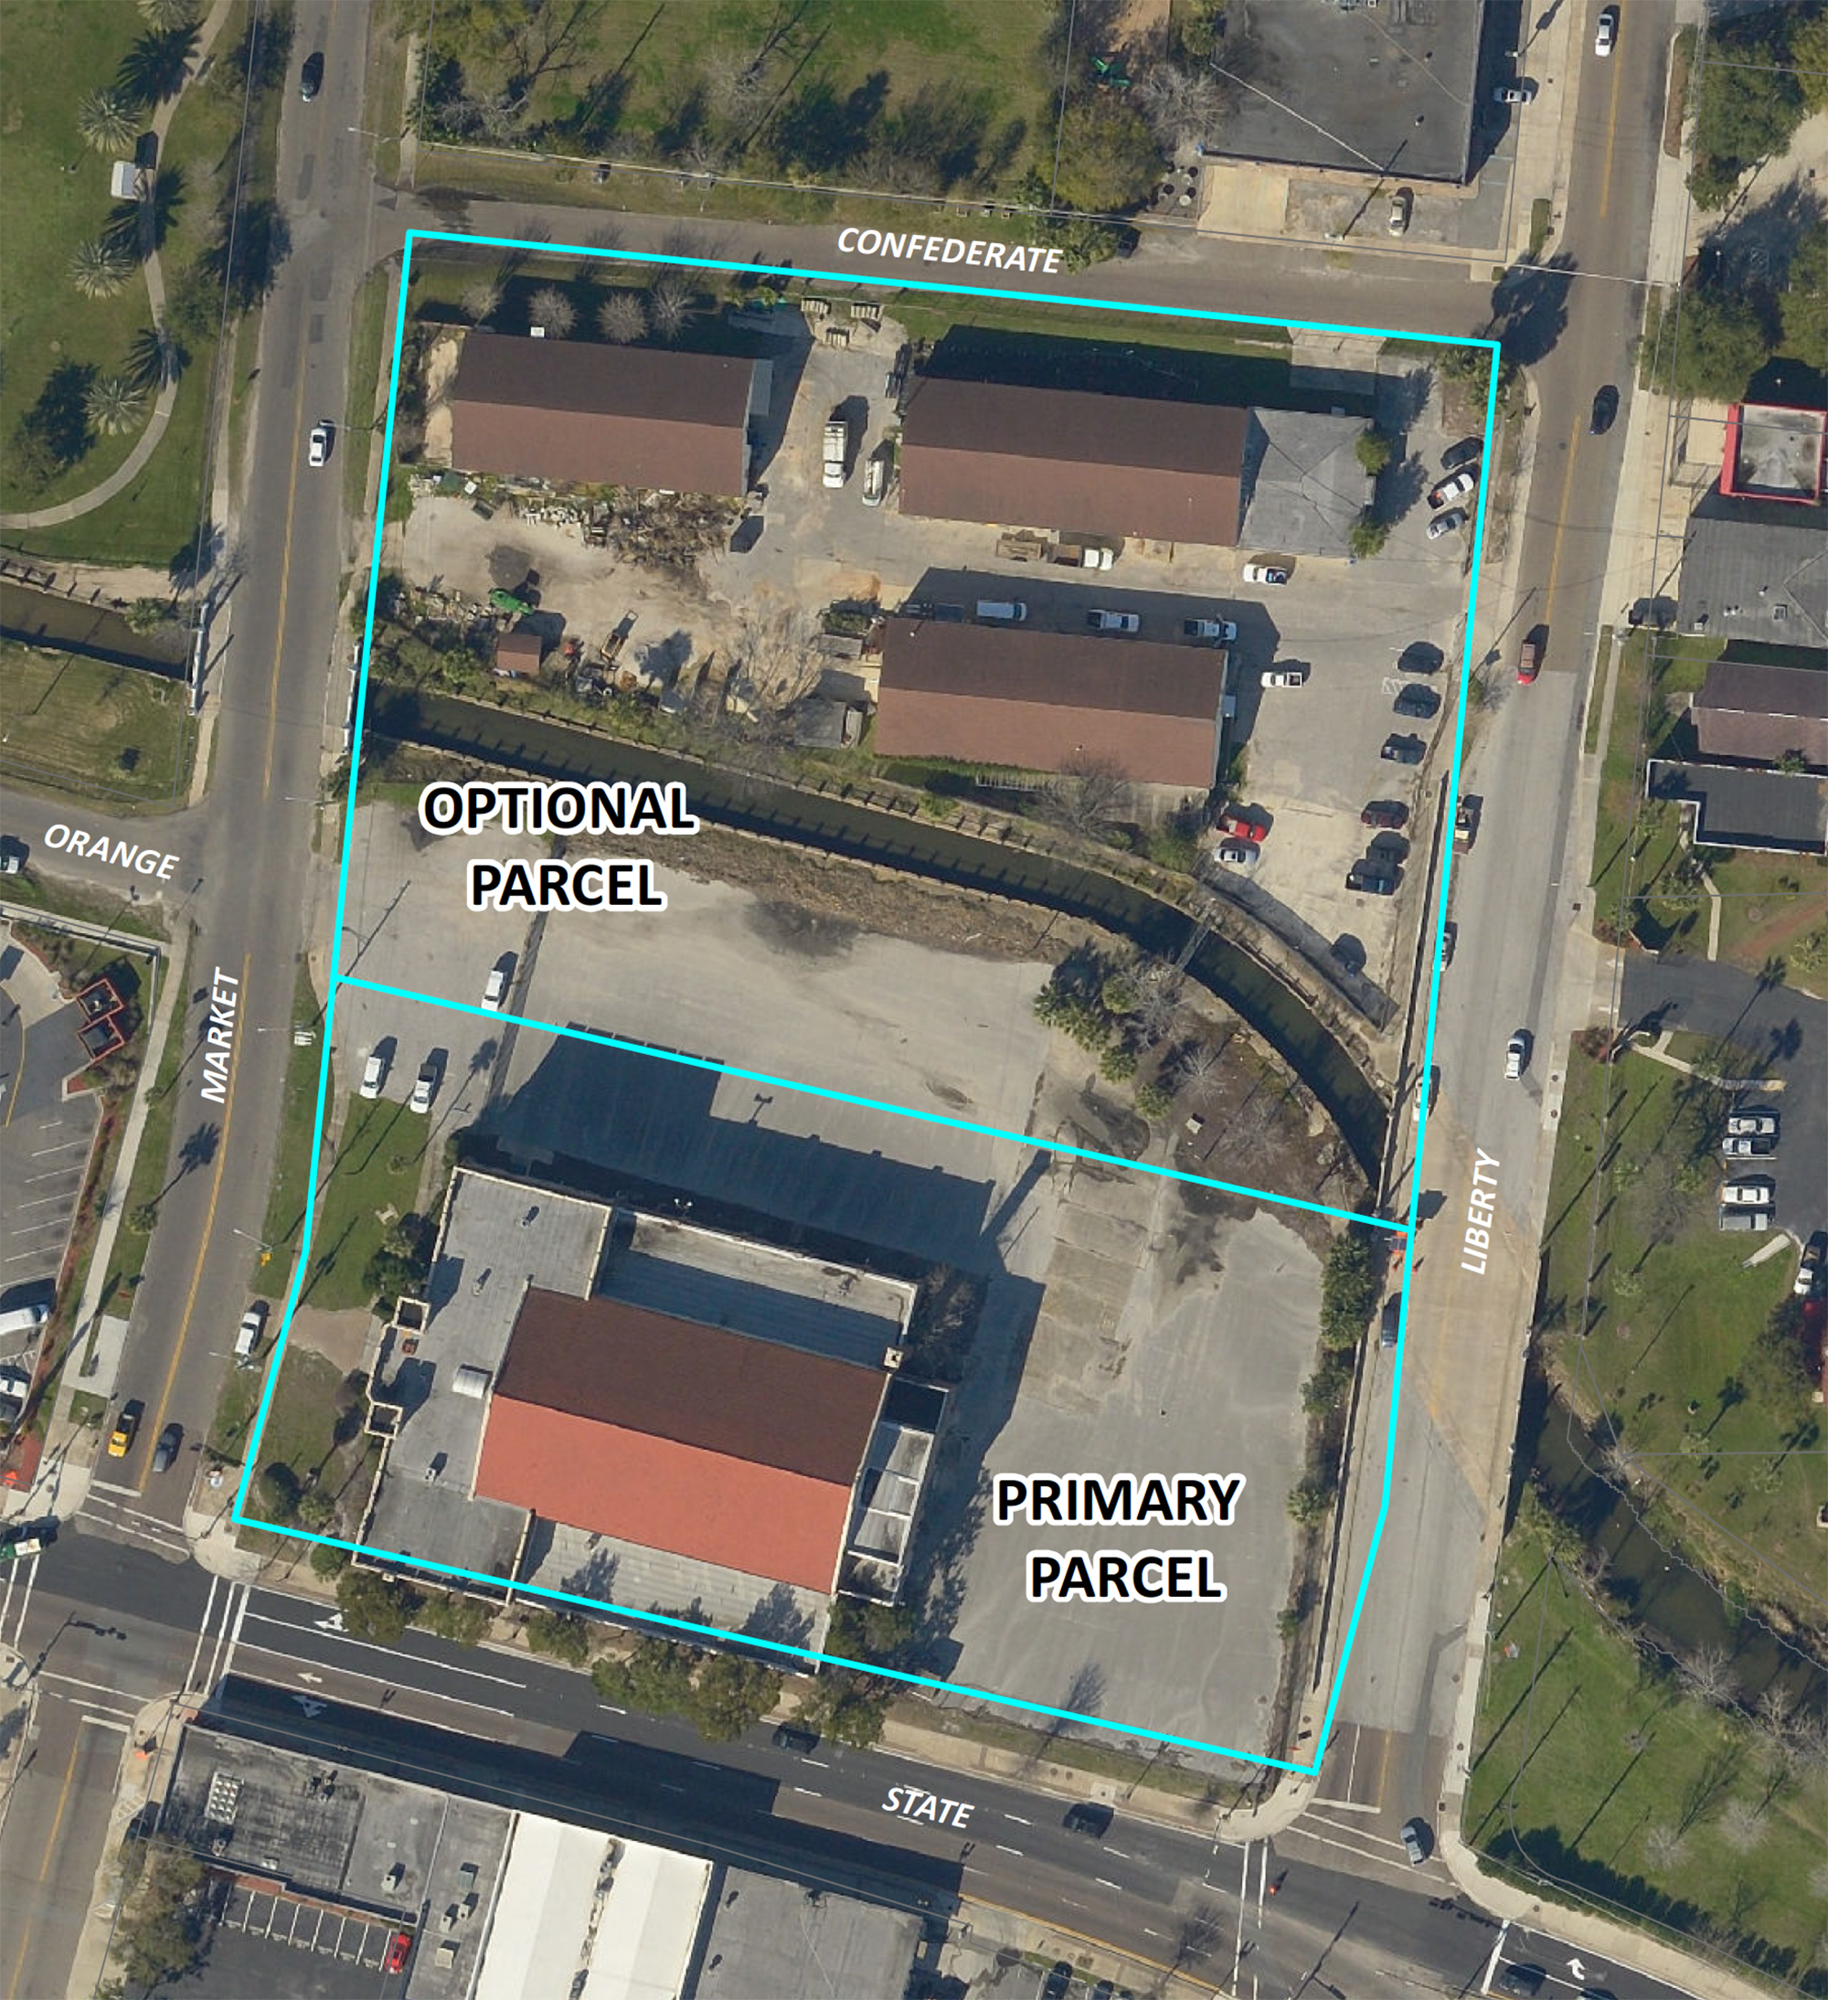 Three companies bid on the city-owned former Florida National Guard armory Downtown at 851 N. Market St. and a neighboring parcel with three warehouses at 928 N. Liberty St.